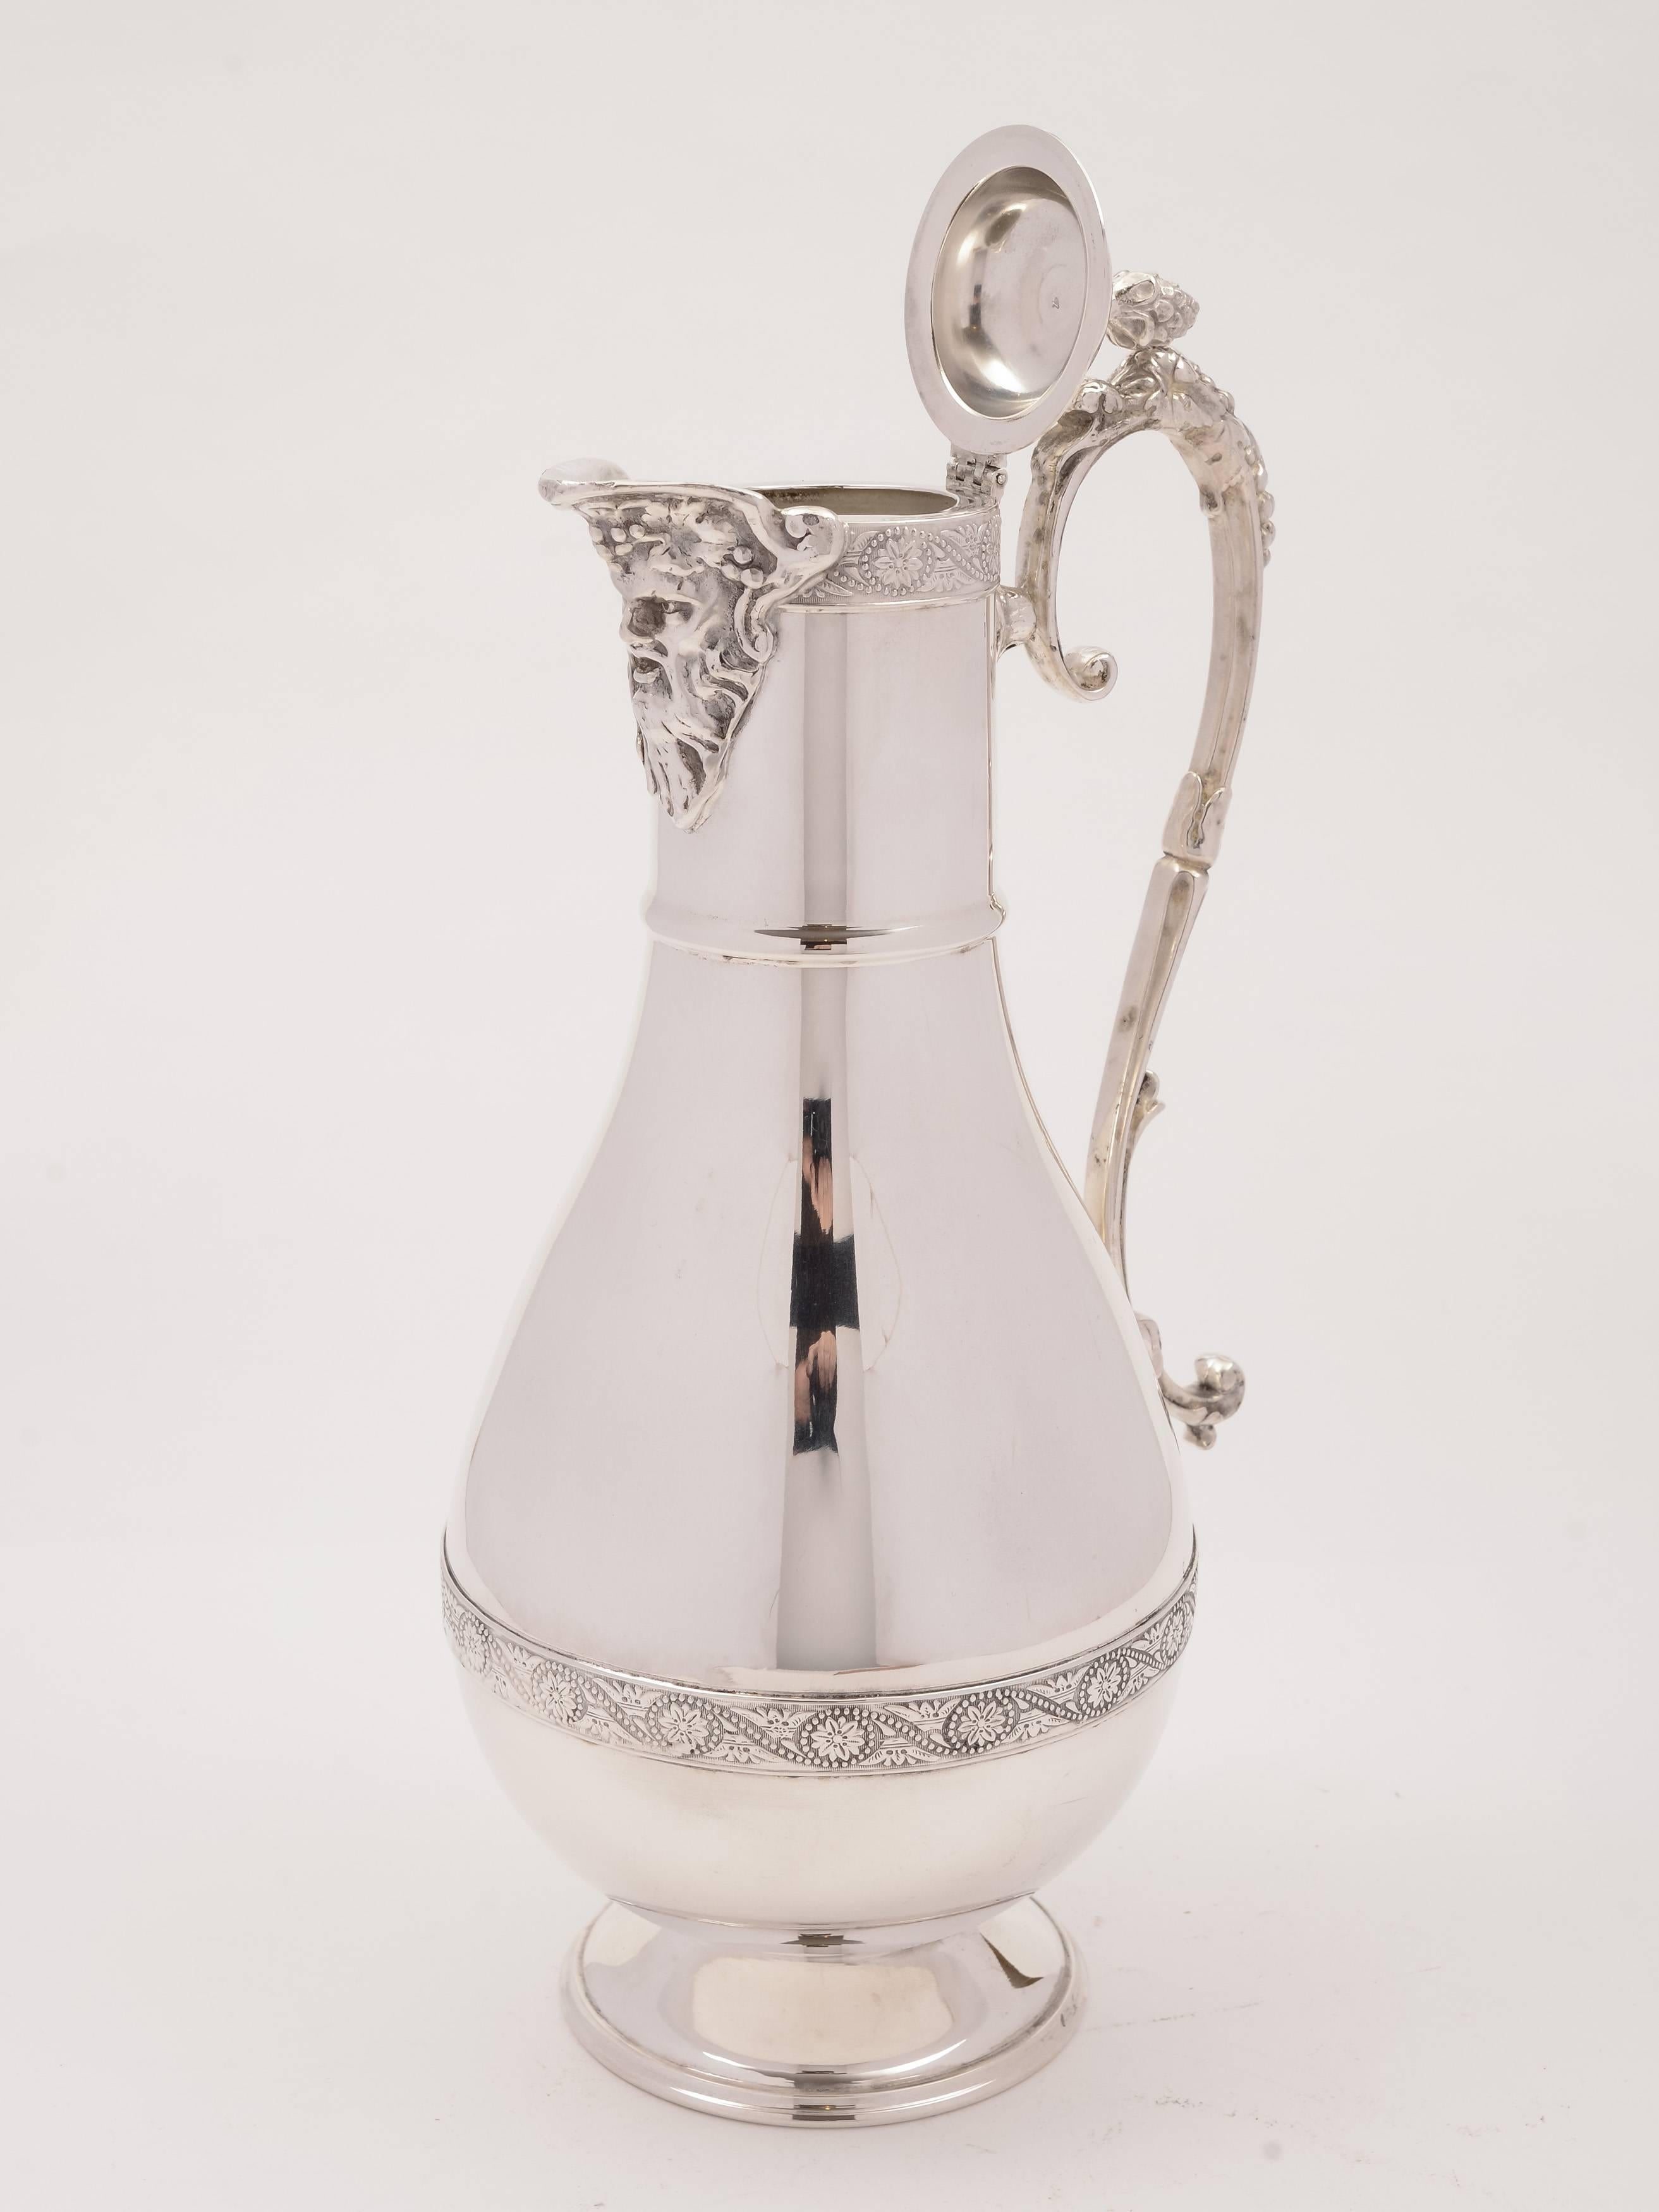 A wonderful English silver plated claret jug with embossed decoration to top and middle, ornate handle and heat of Bacchus as pouring spout, circa 1920.

Weight: 803g.
   